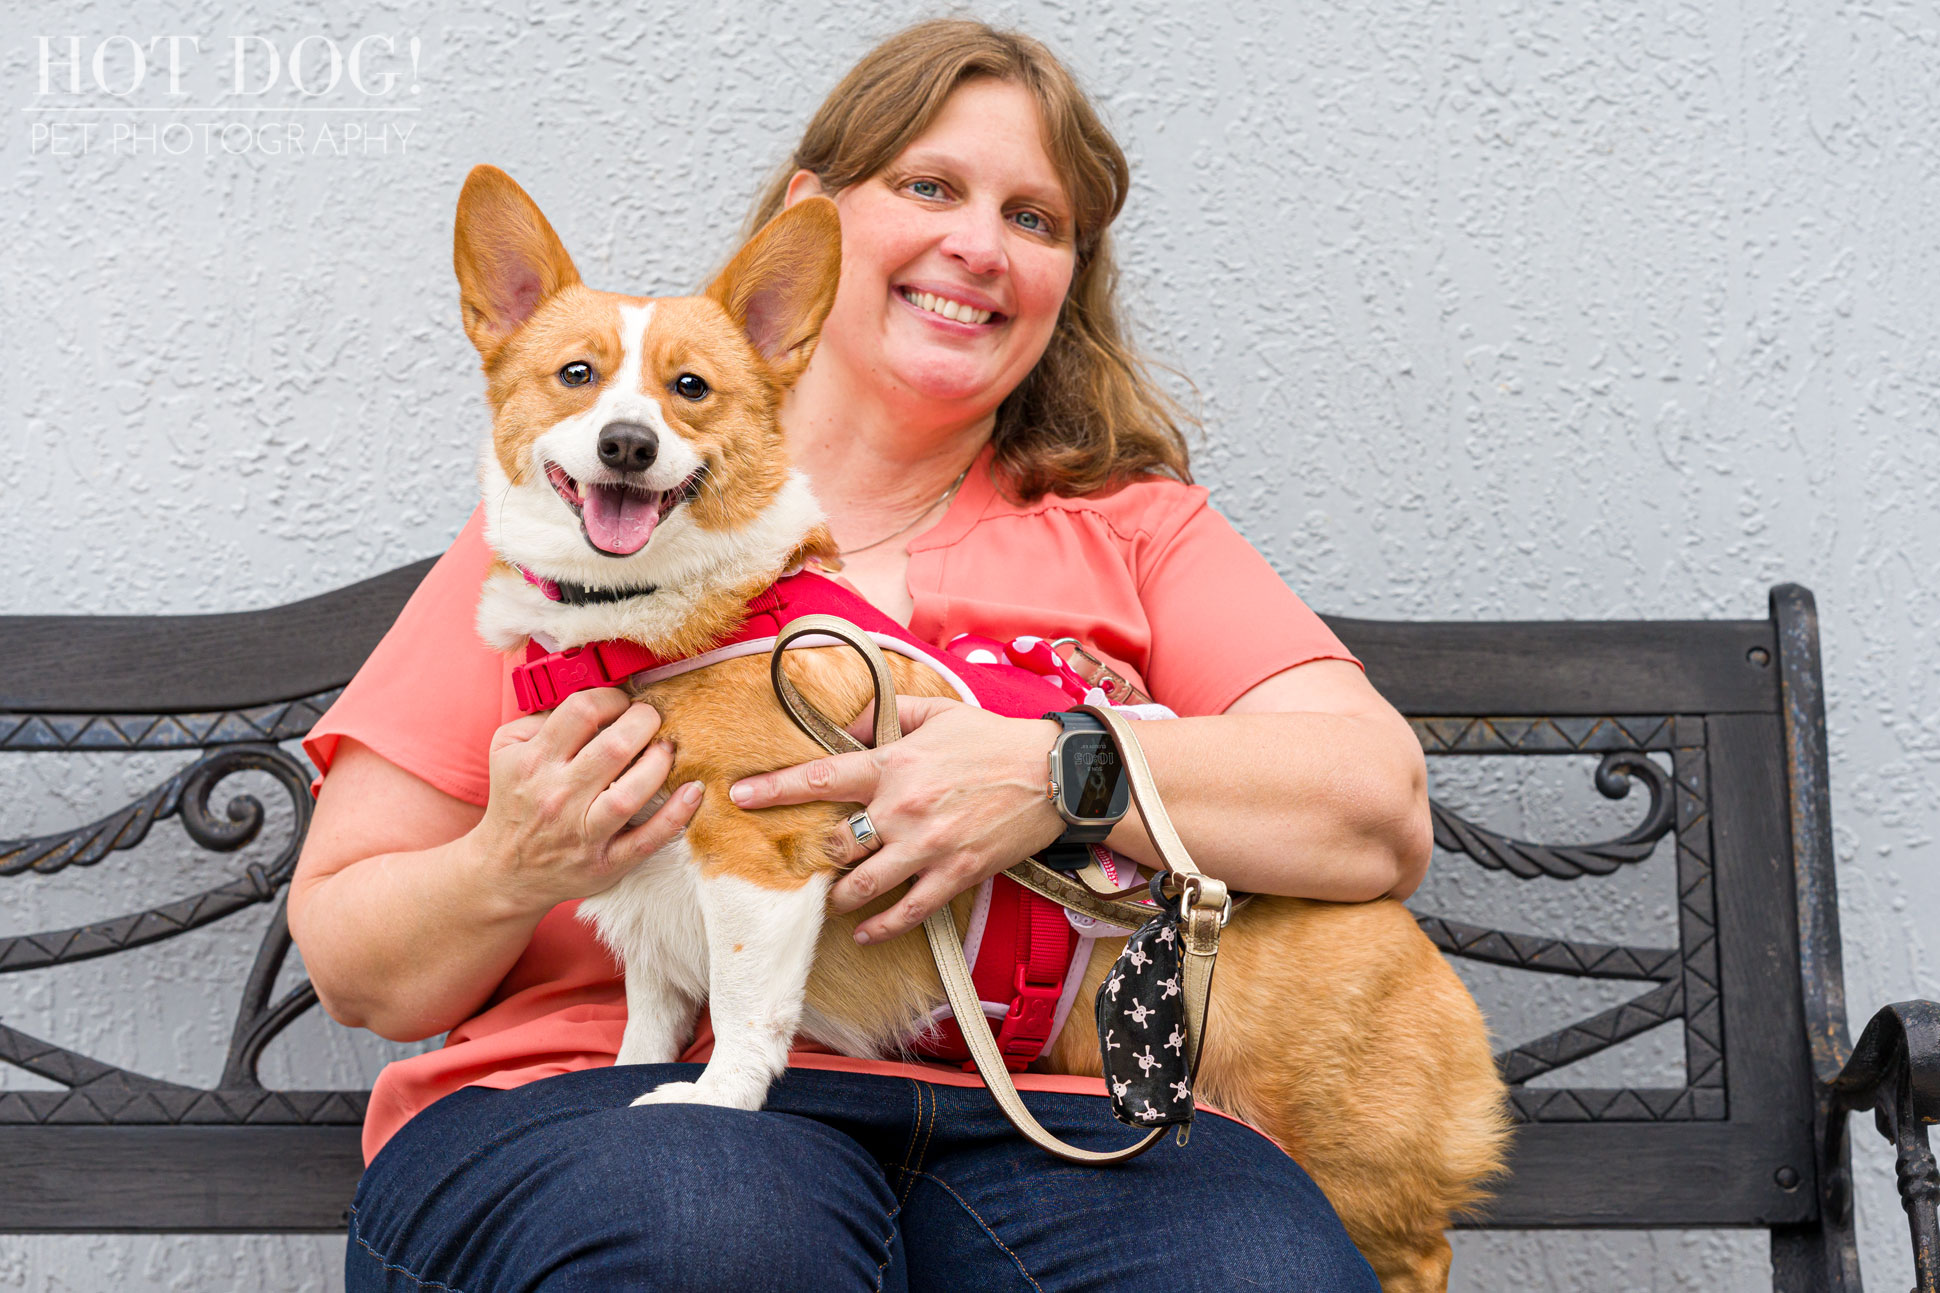 Hot Dog! Pet Photography captures the love and bond between Cinnamon the corgi and her mom in this professional pet photo session.